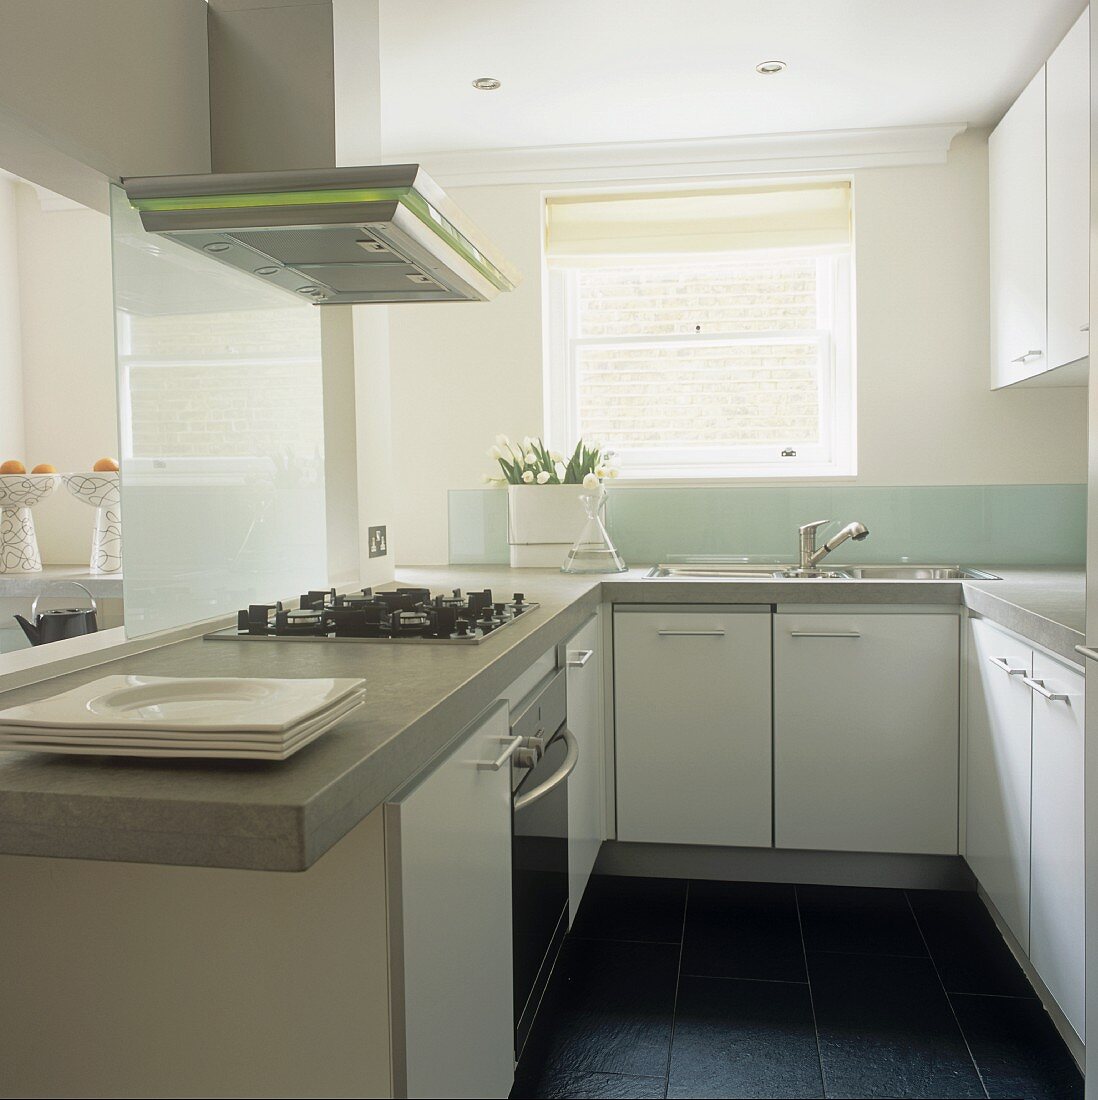 A functional white kitchen with an extractor fan above a work surface